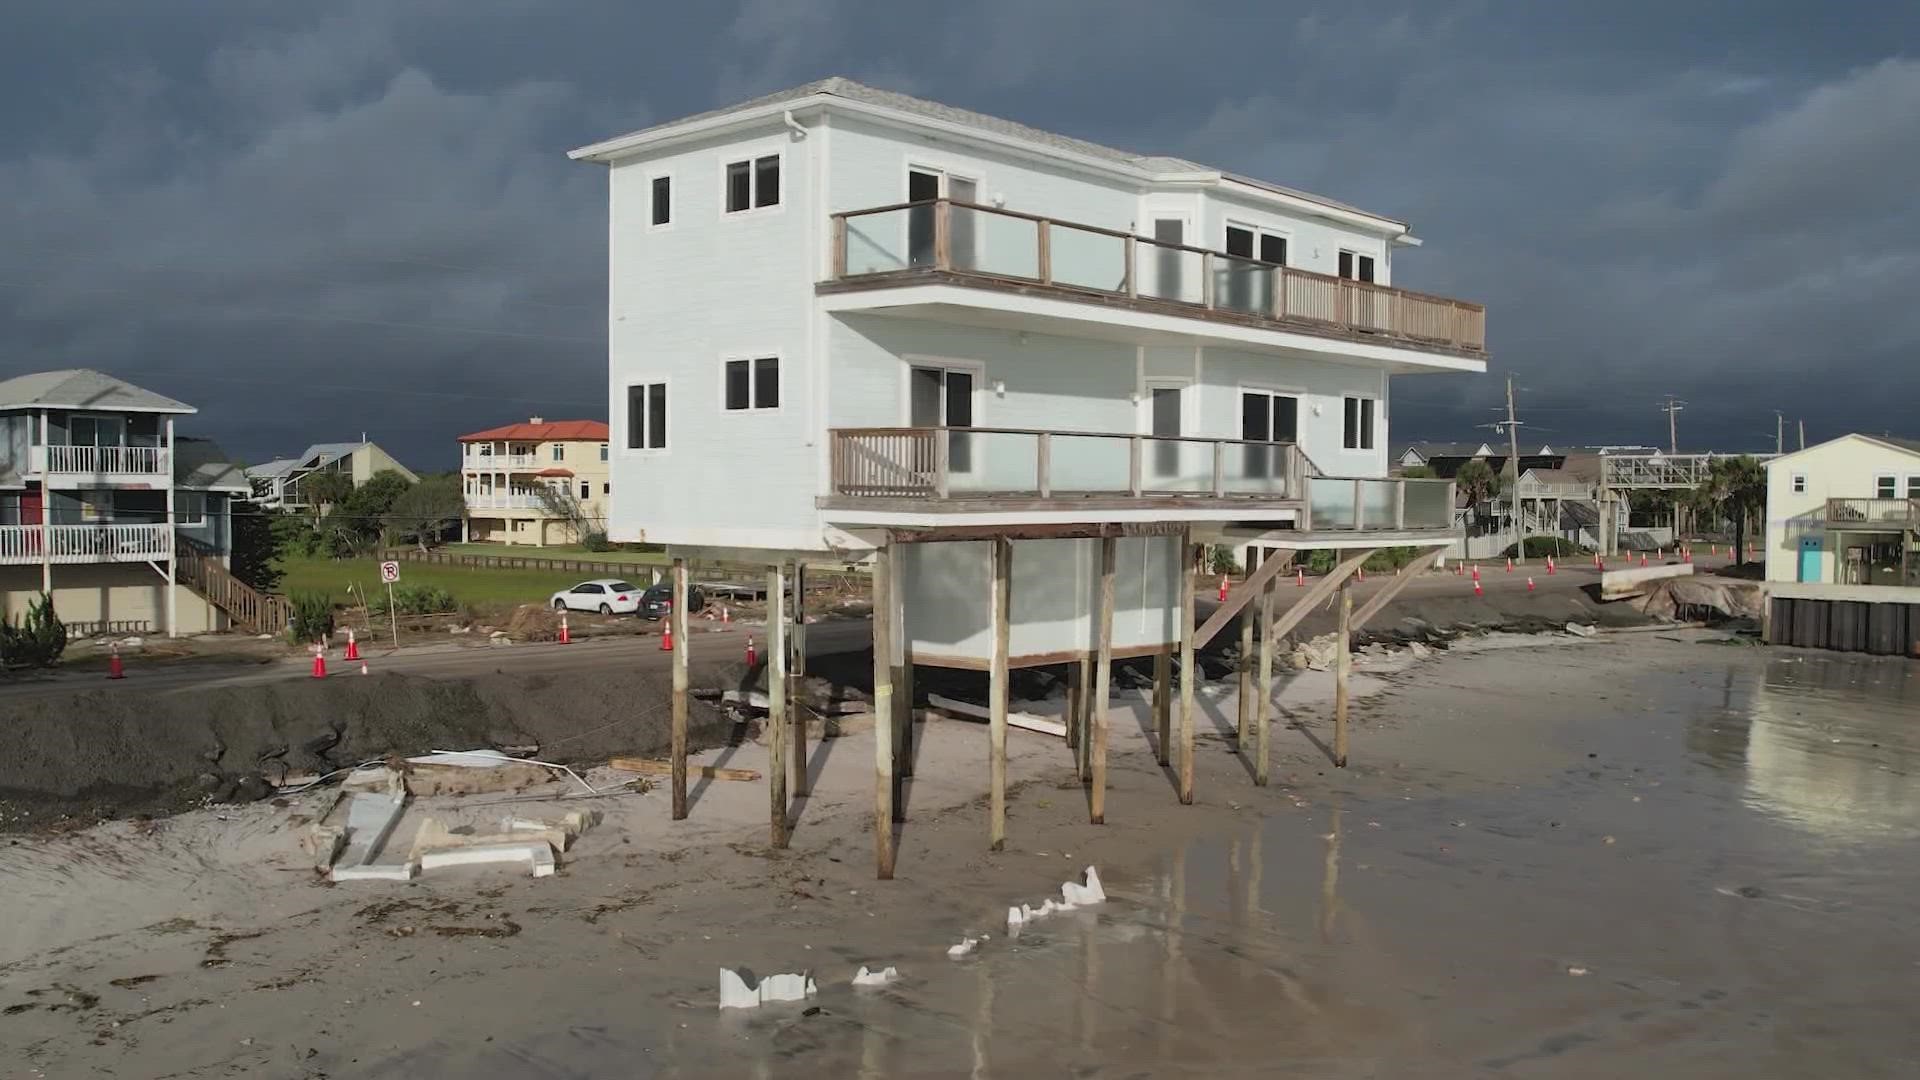 It has survived hurricanes and tropical storms. This is what the blue house in Vilano Beach looks like now after Tropical Storm Nicole.